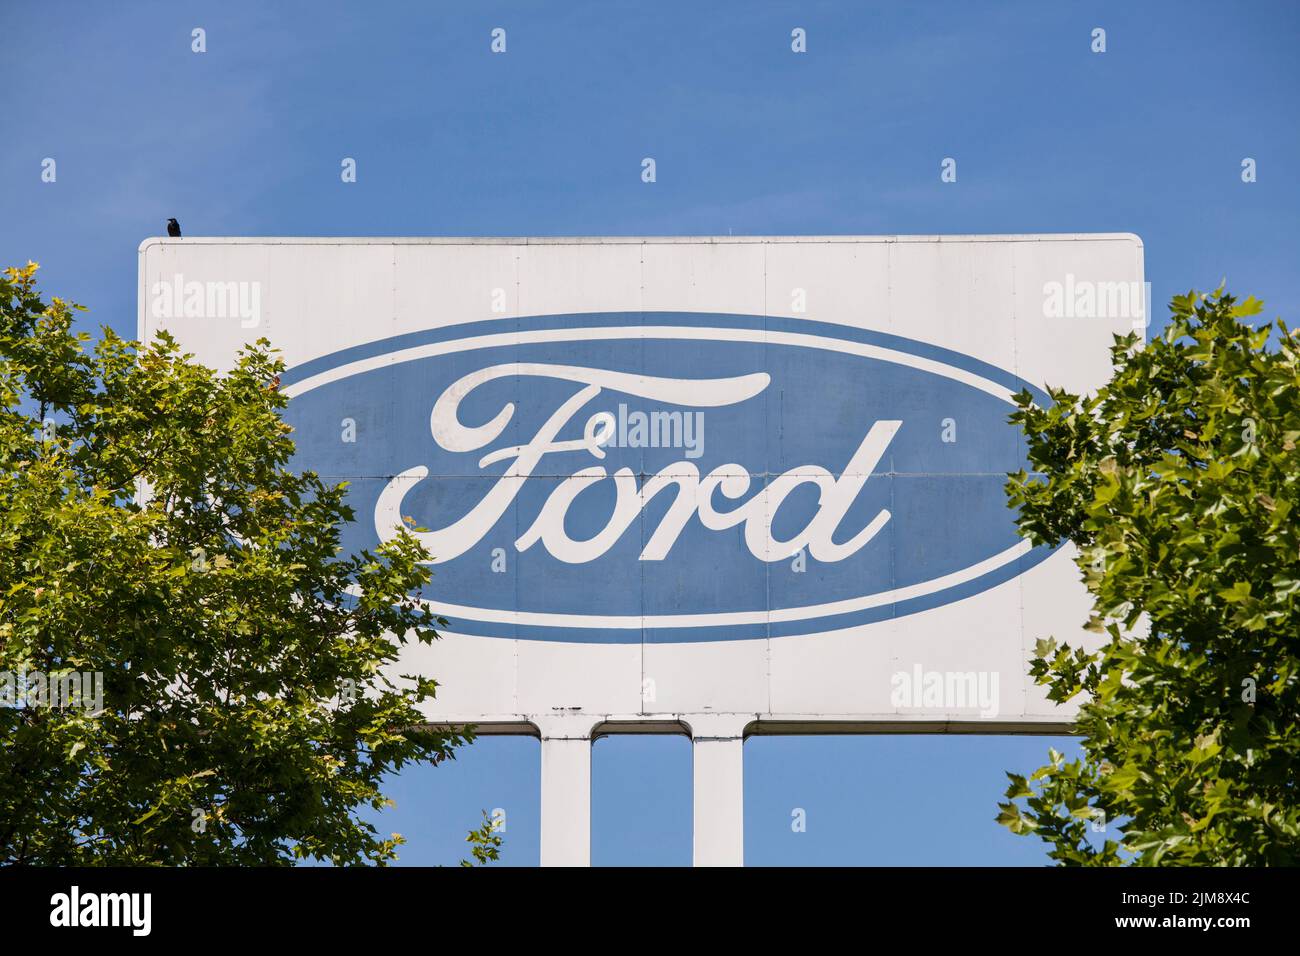 large advertising sign at the Ford automobile factory in the town district Niehl, Cologne, Germany. grosses Werbeschild an den Ford-Werken in Niehl, K Stock Photo